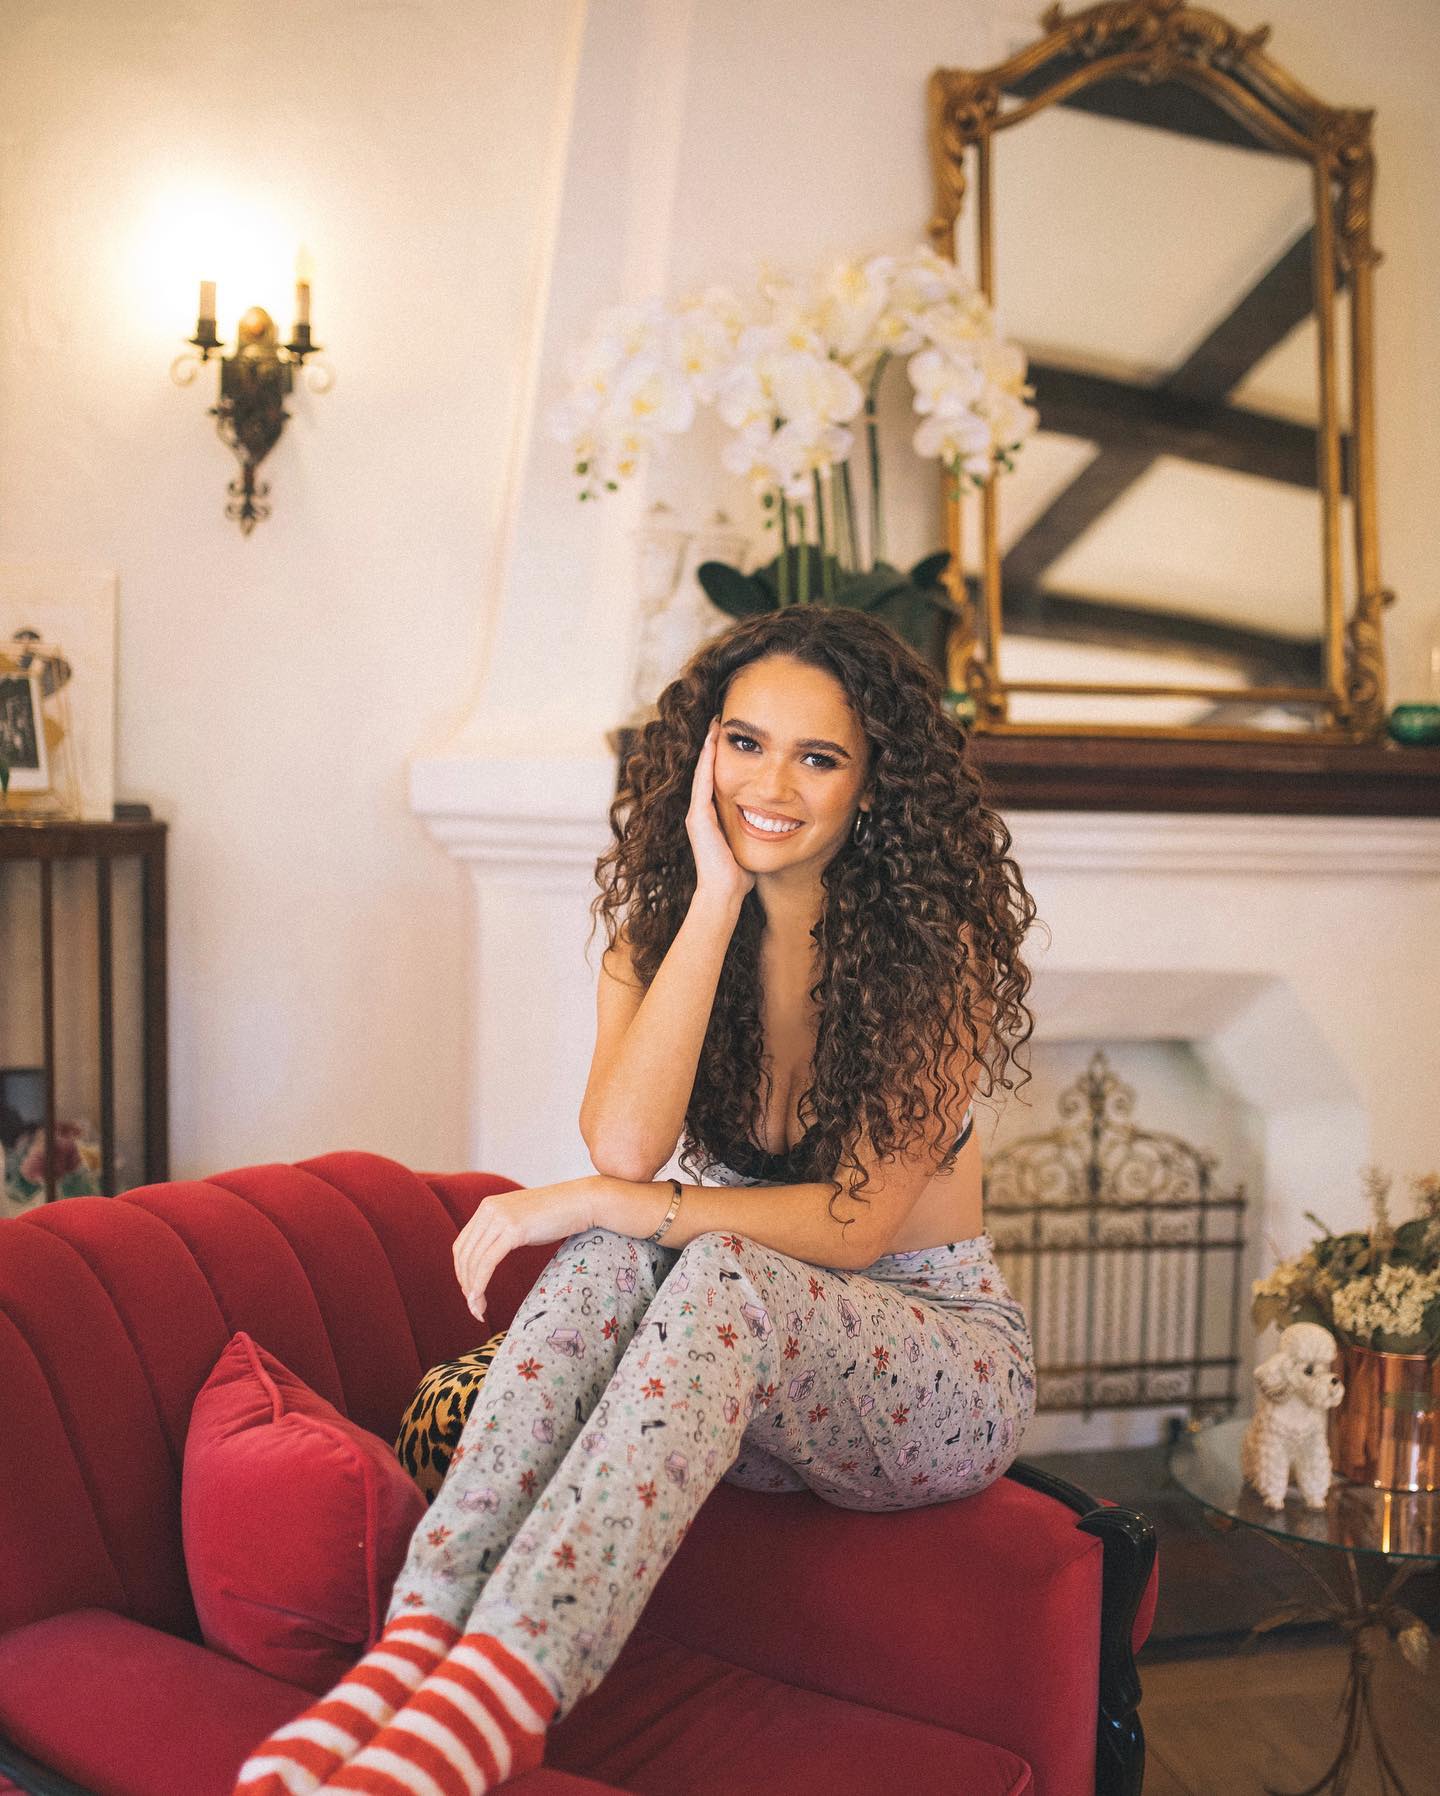 Madison Pettis Gets Sexy for Christmas! - Photo 10